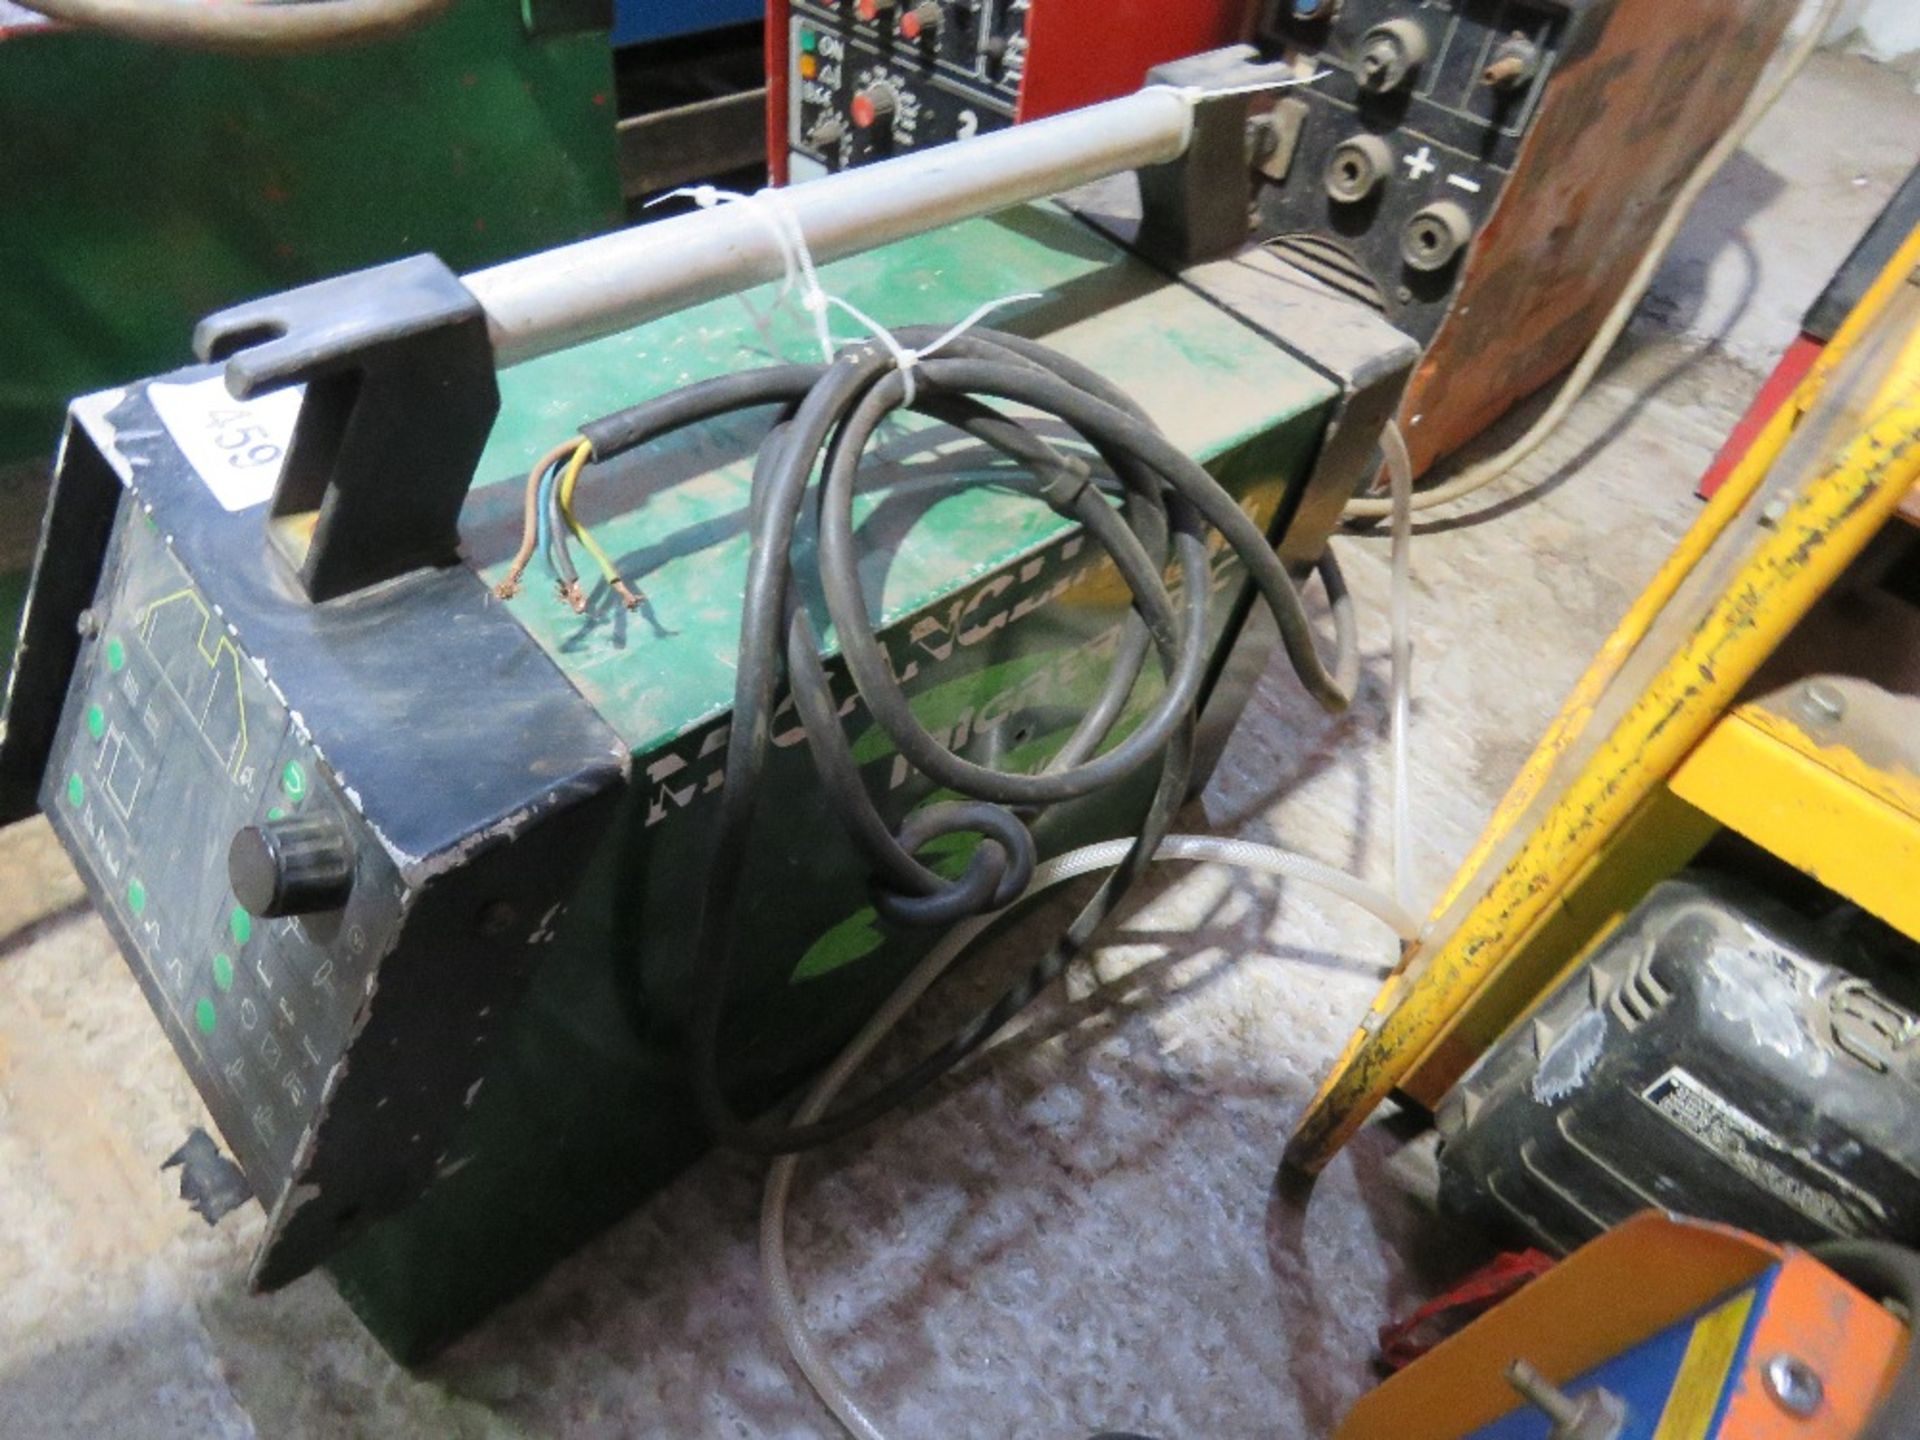 MIGATRONIC PILOT 2400 3 PHASE WELDER. DIRECT FROM LOCAL COMPANY. SURPLUS TO REQUIREMENTS. - Image 2 of 5